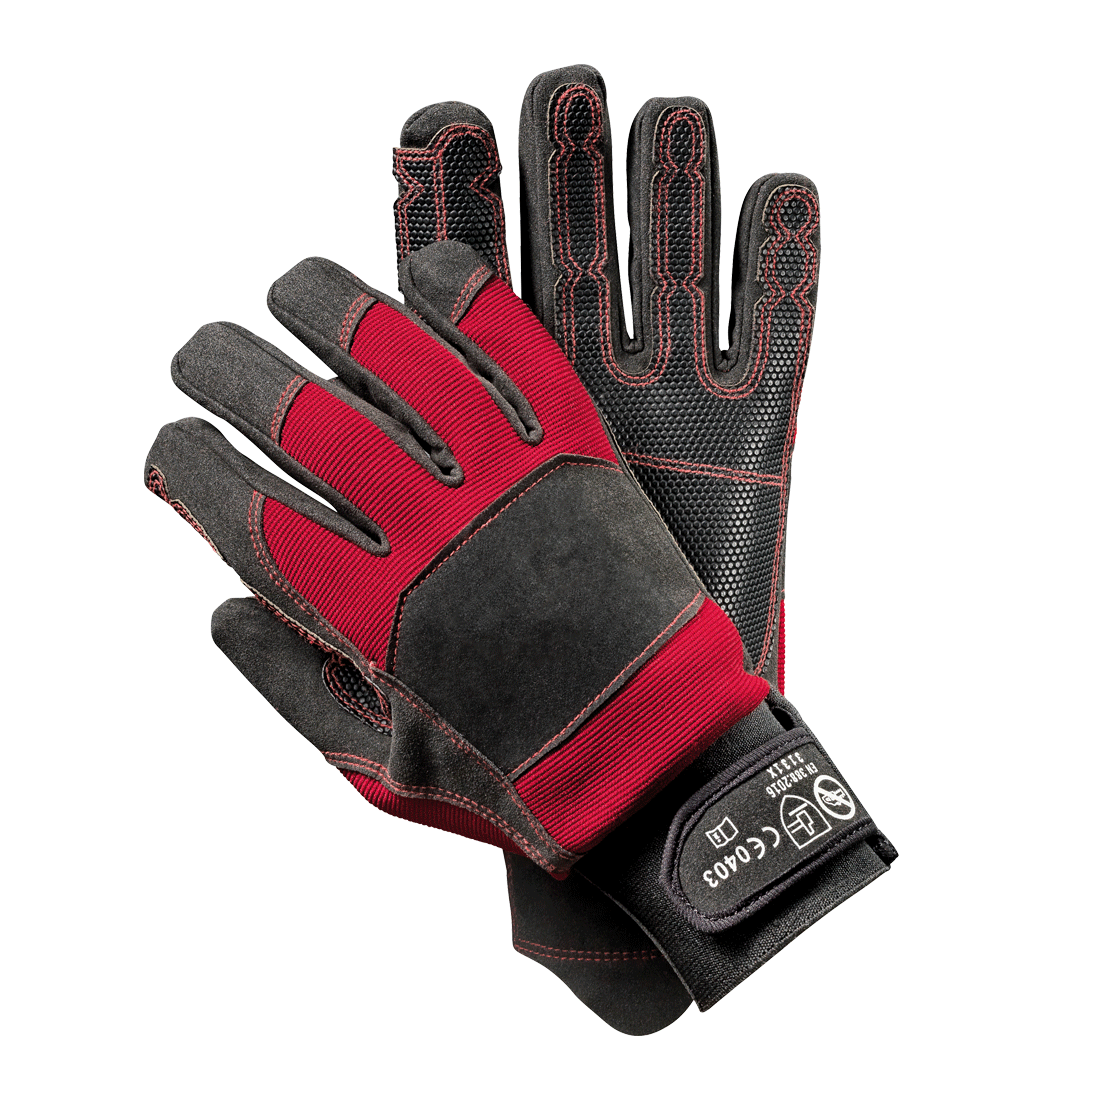 CHAINSAW PROTECTION GLOVE CUFF+VELCRO